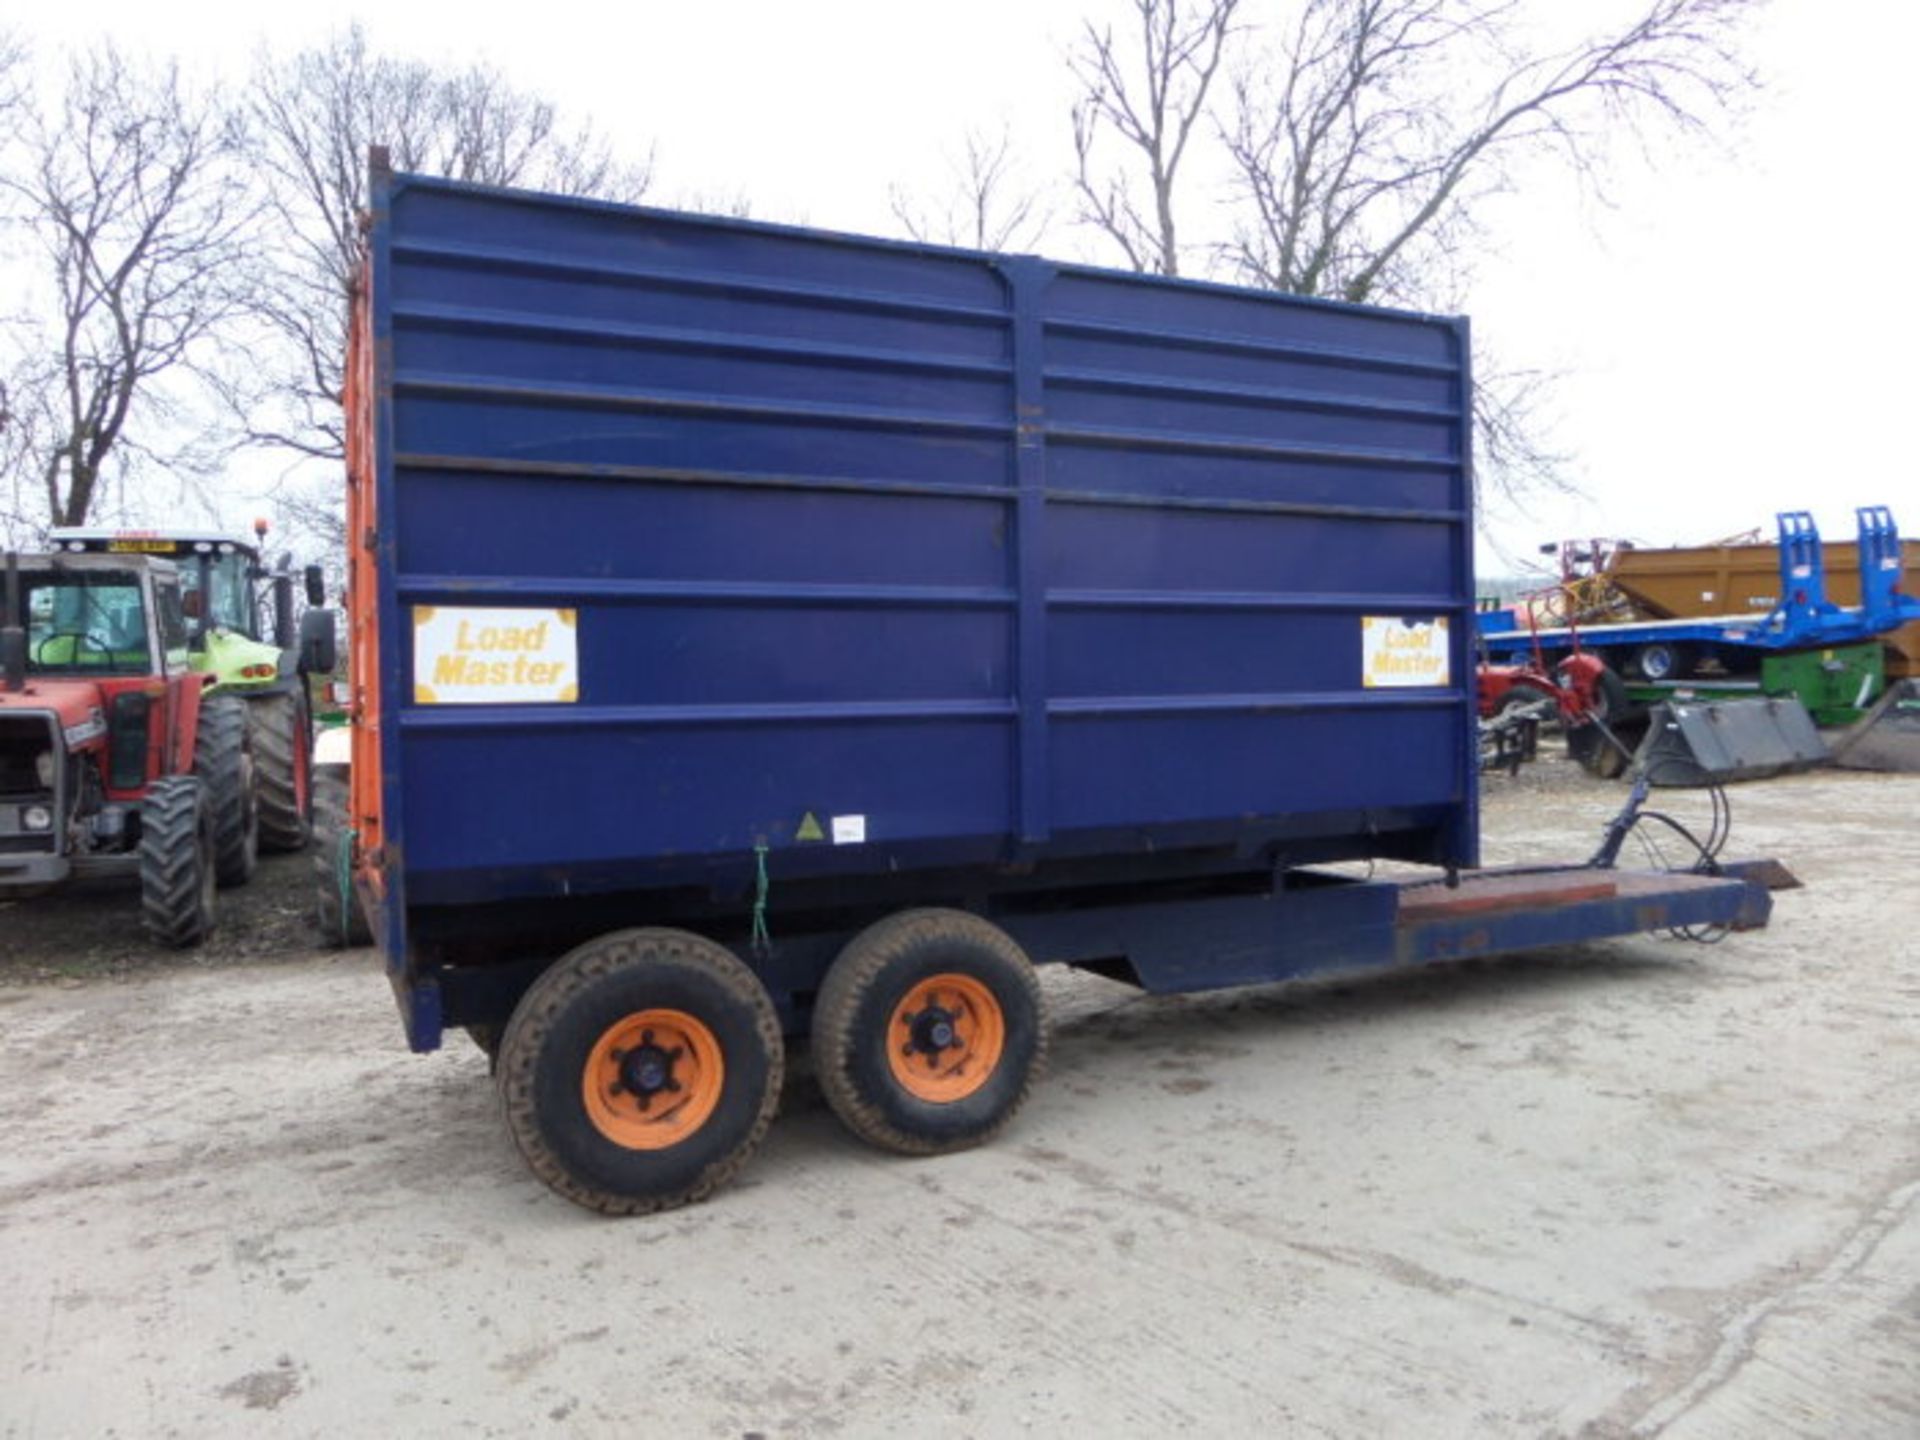 FOSTER 8 TONNE LOAD MASTER TIPPING TRAILER - Image 4 of 6